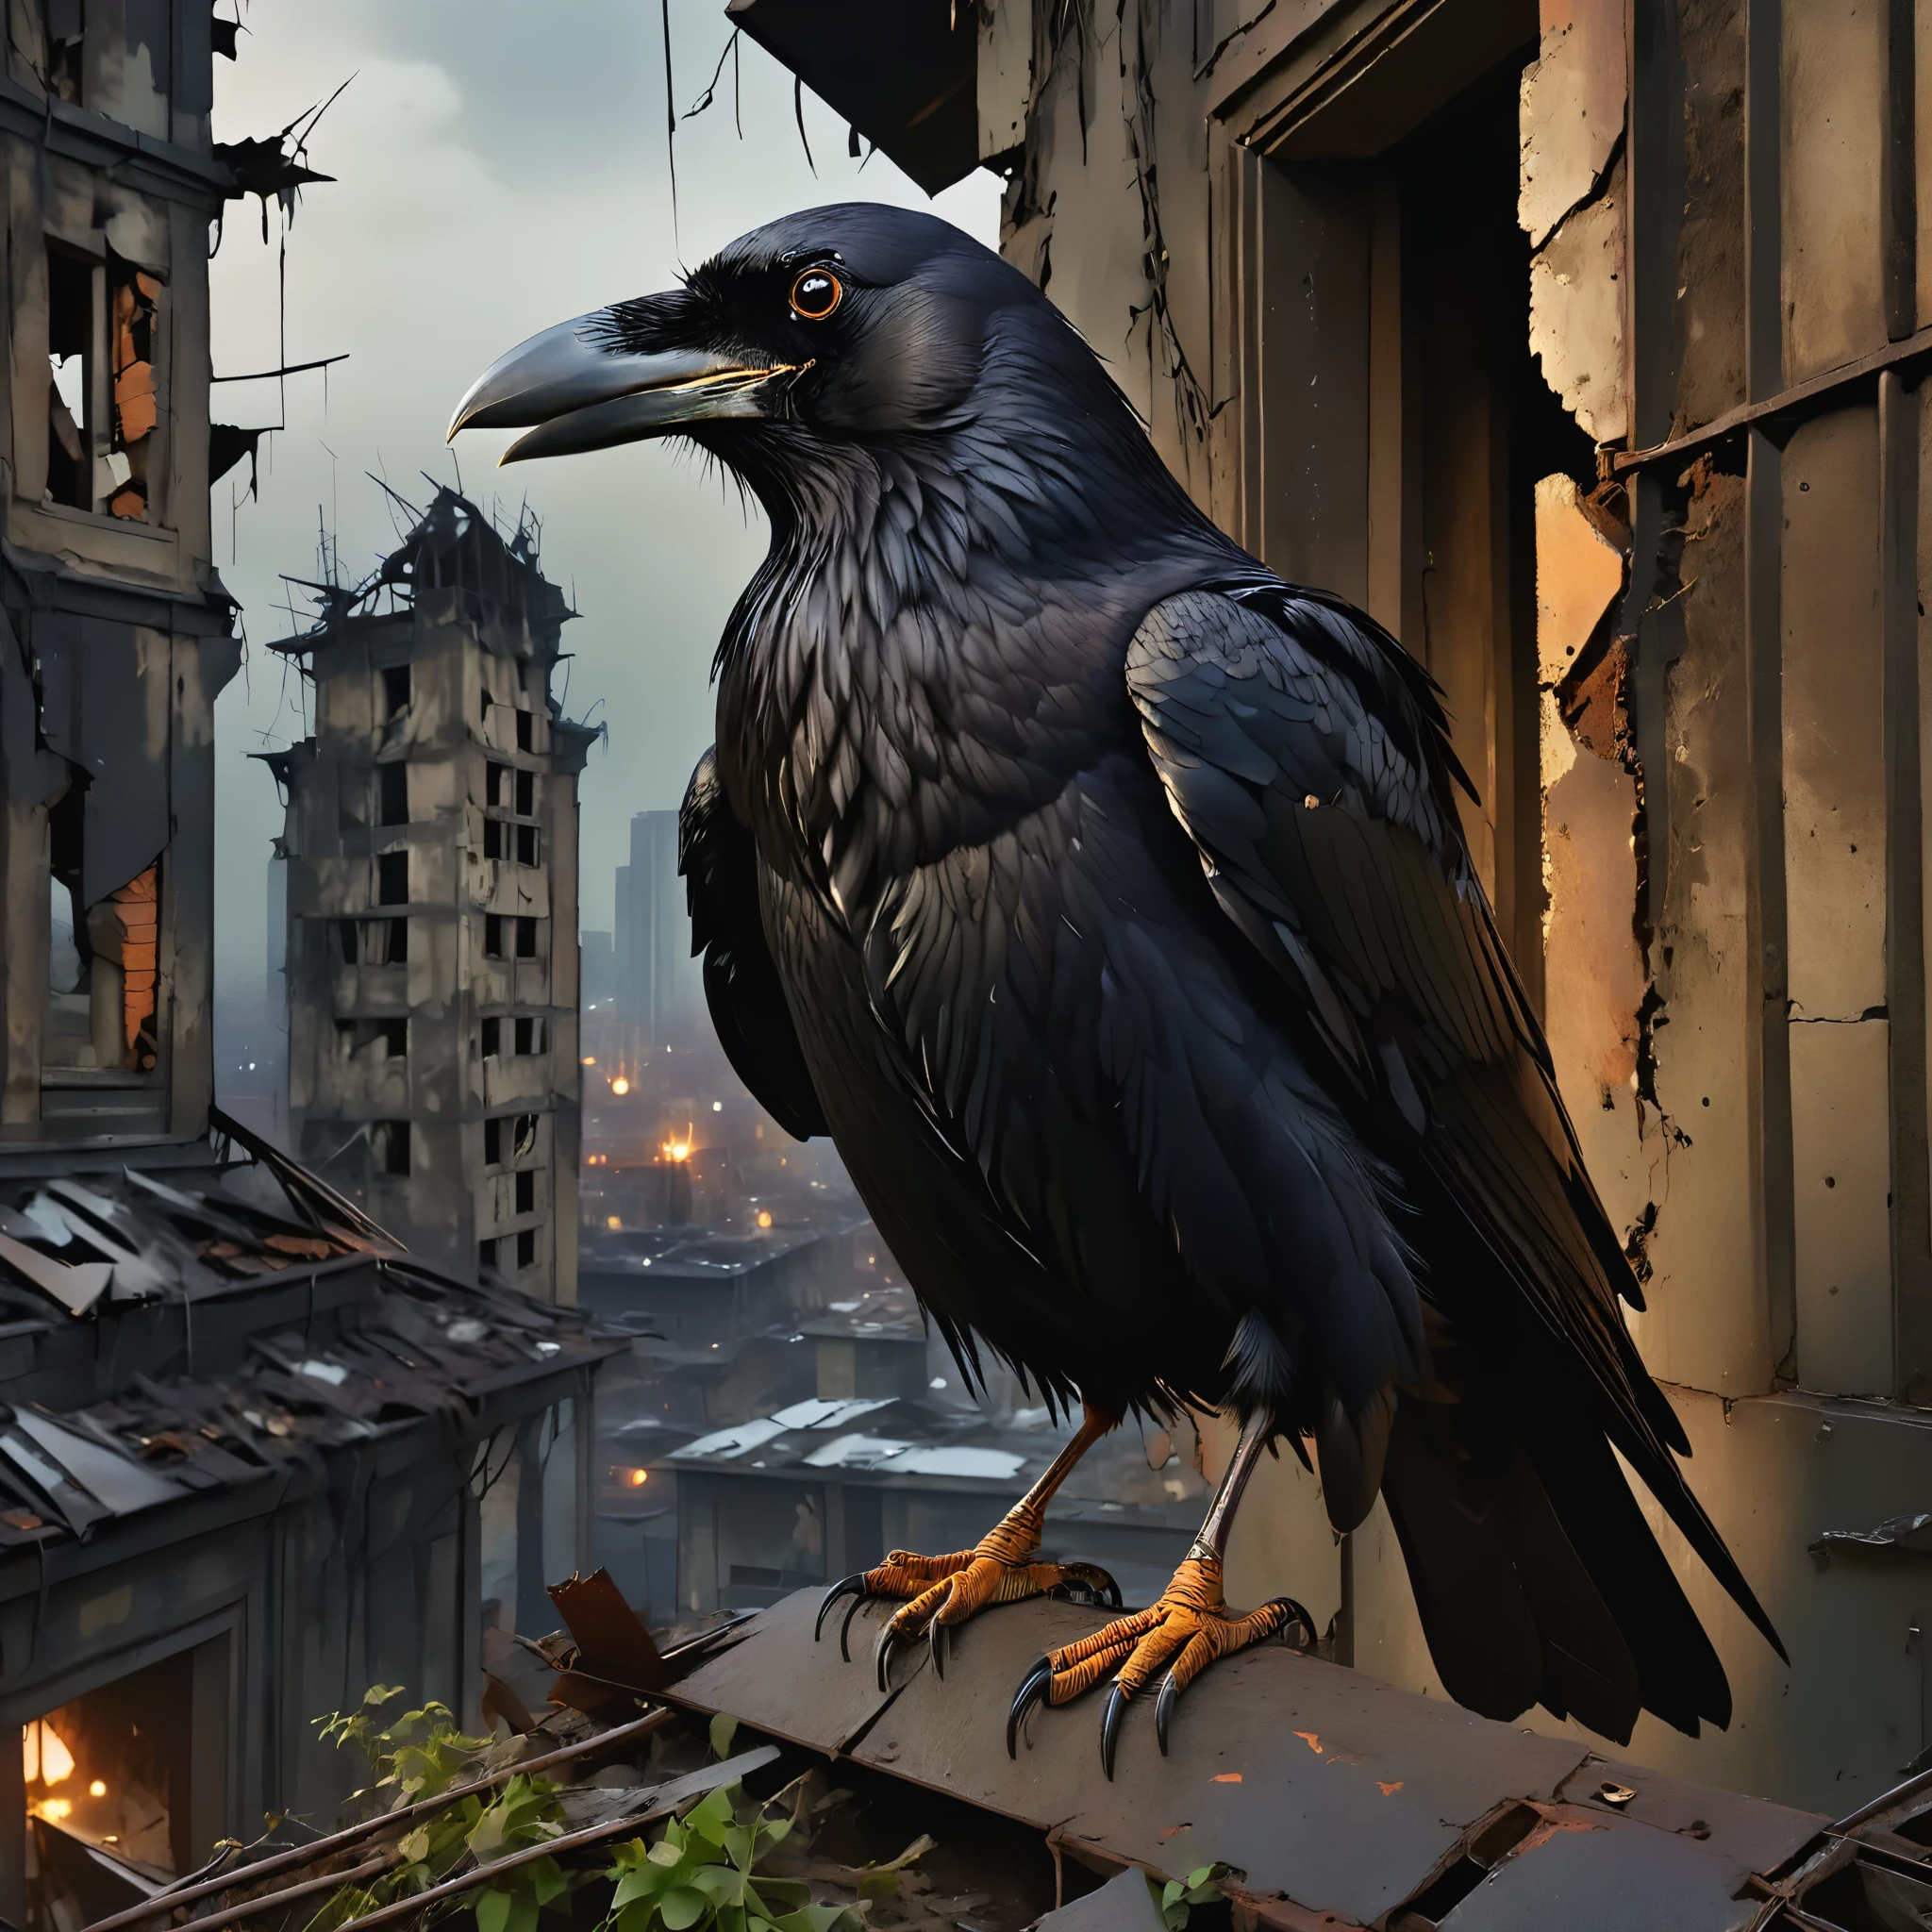 A three legged crow with golden eyes,solo, angle of views,crow ,flying crow, crying crow, close-up, pov , straight-on,winter, dark, dusk,cracked  broken walls, an abandoned old rusty buildings, an overgrown , frame weathered and worn, detailed,futuristic city environment, post-apocalyptic